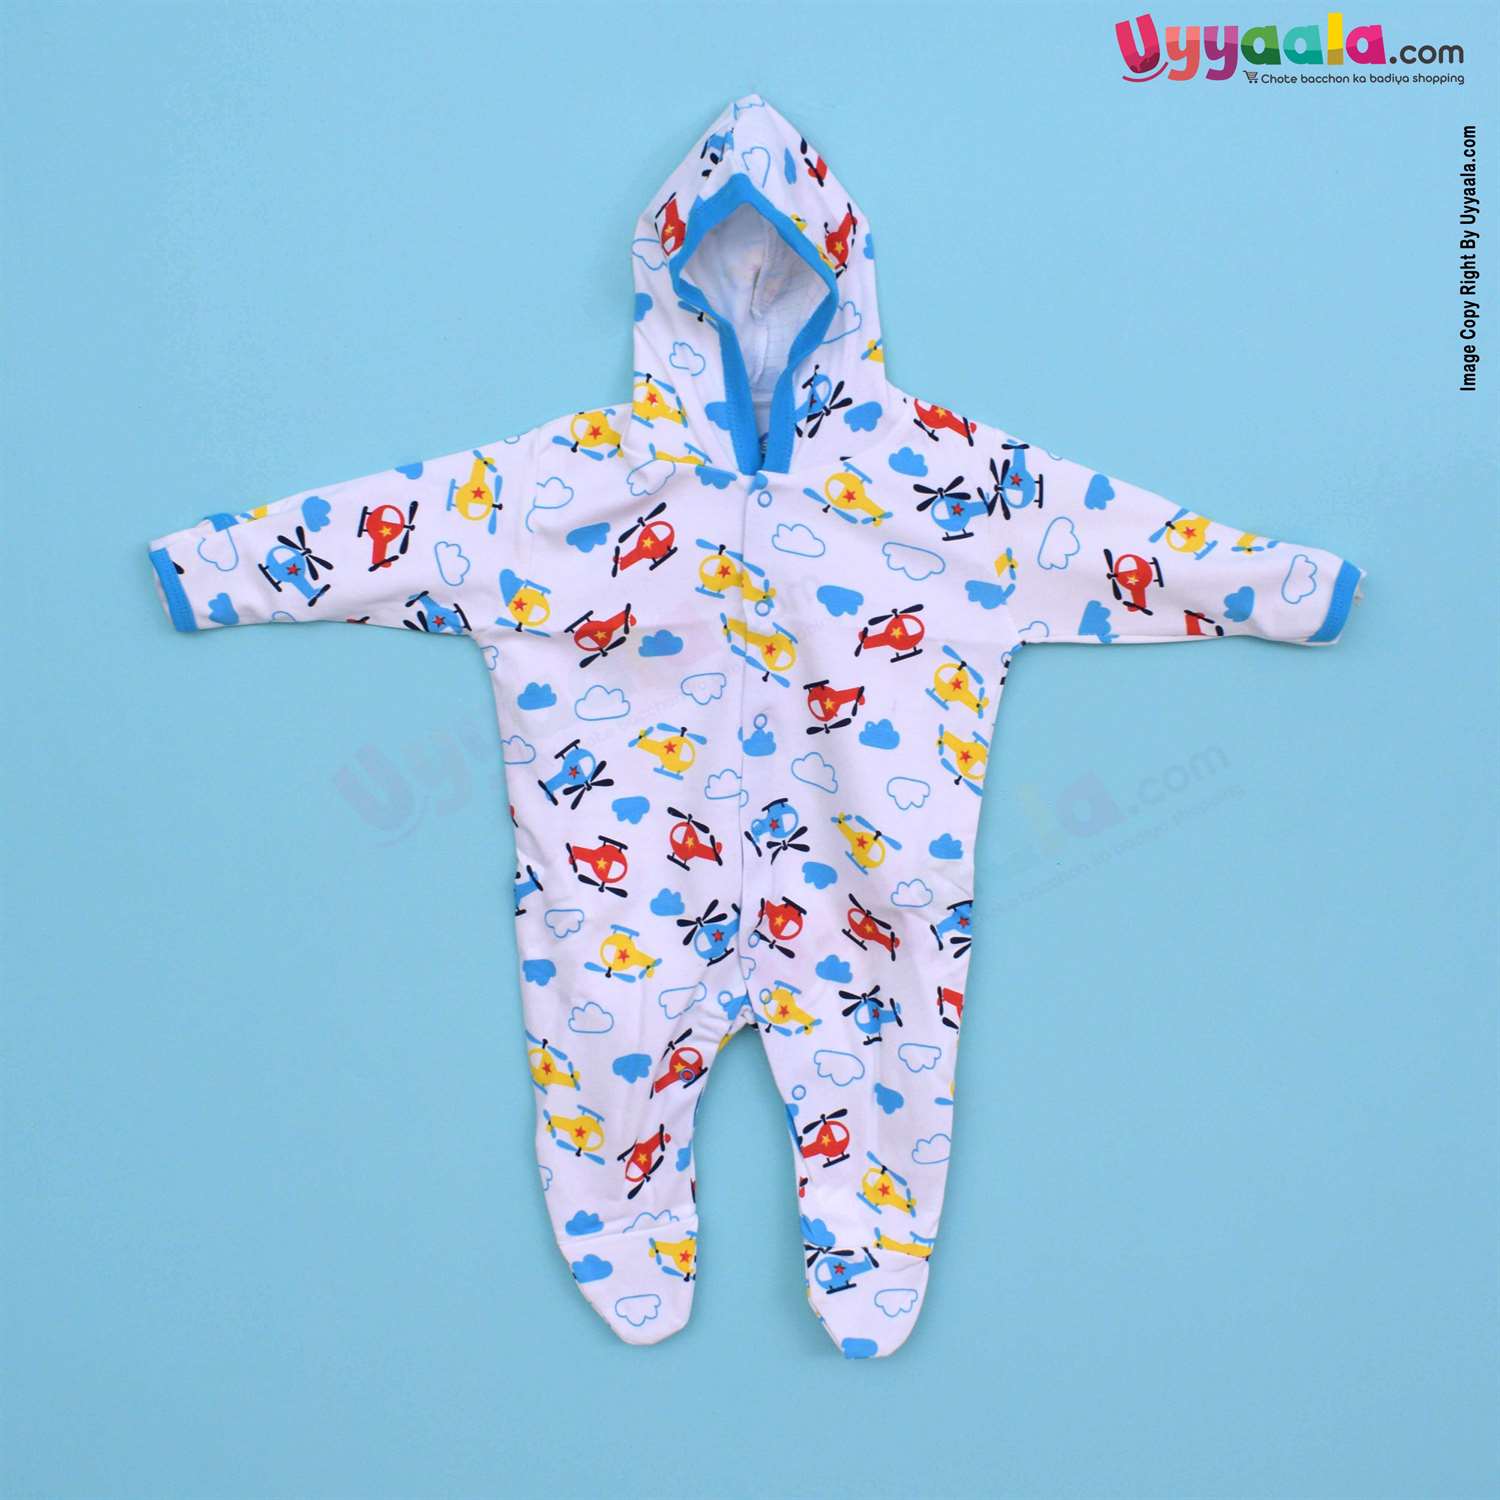 MAGIC TOWN Hooded Sleep Suits Hosiery Plain Sky Blue and Chopper Clouds Print White 2P Pack, New Born